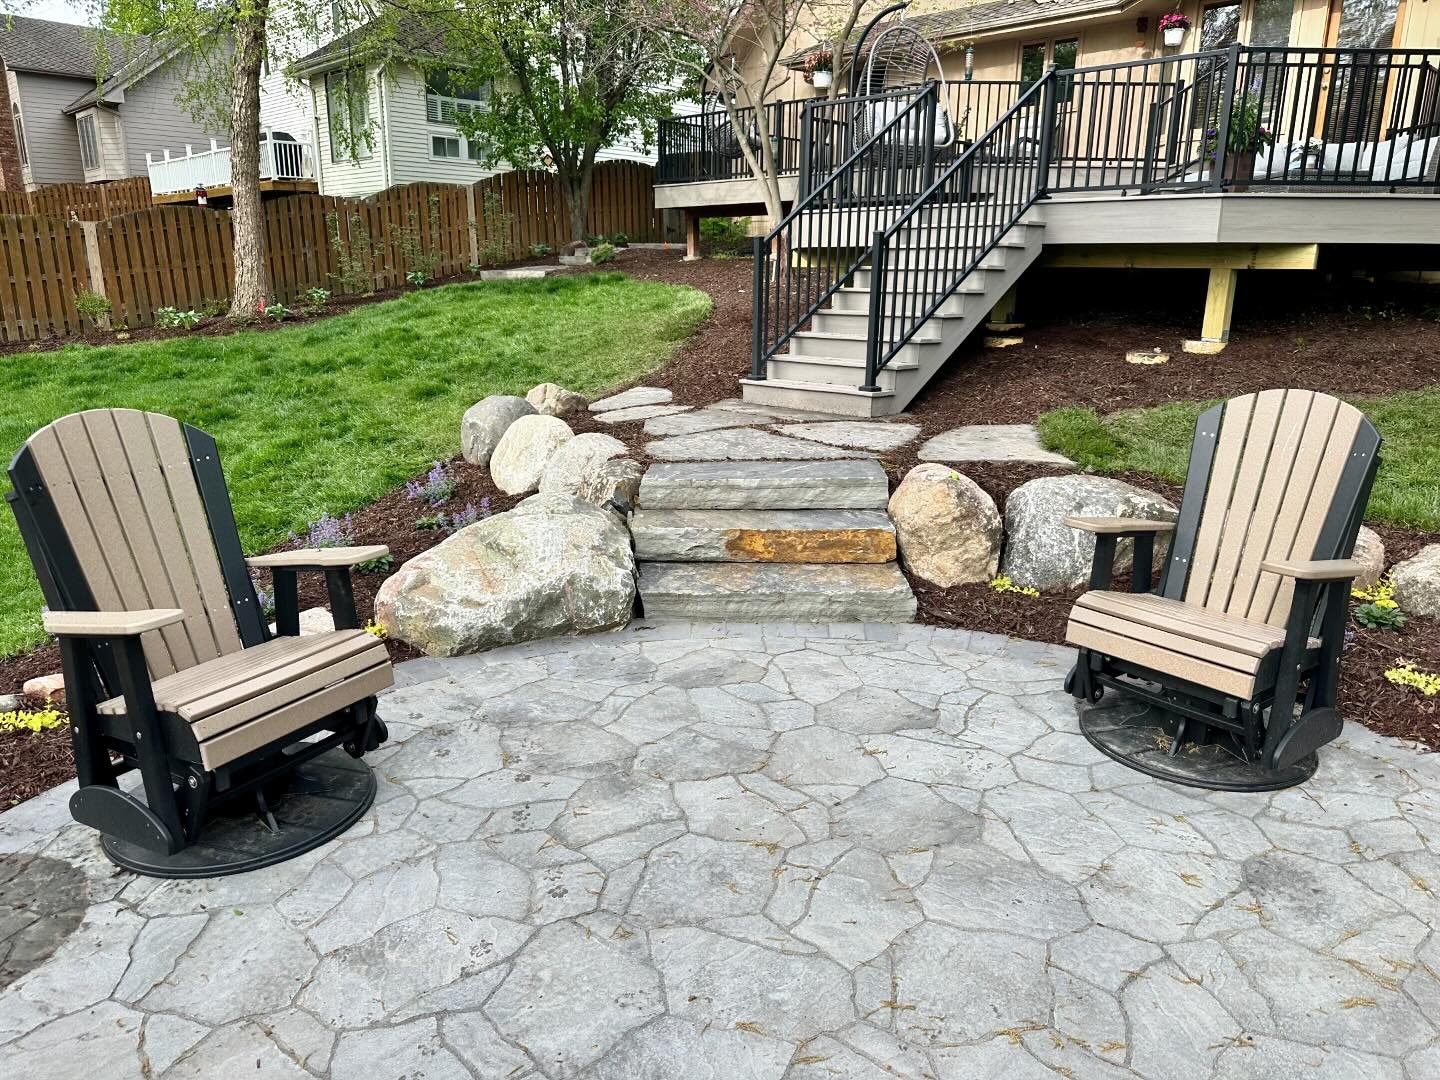 My outdoor oasis is almost done! We just need to finish-up the under decking and add a few more flowers to fill in that area when they&rsquo;re done. I have a little hummingbird bubbler fountain coming too, and then I&rsquo;ll be fully ready for all 